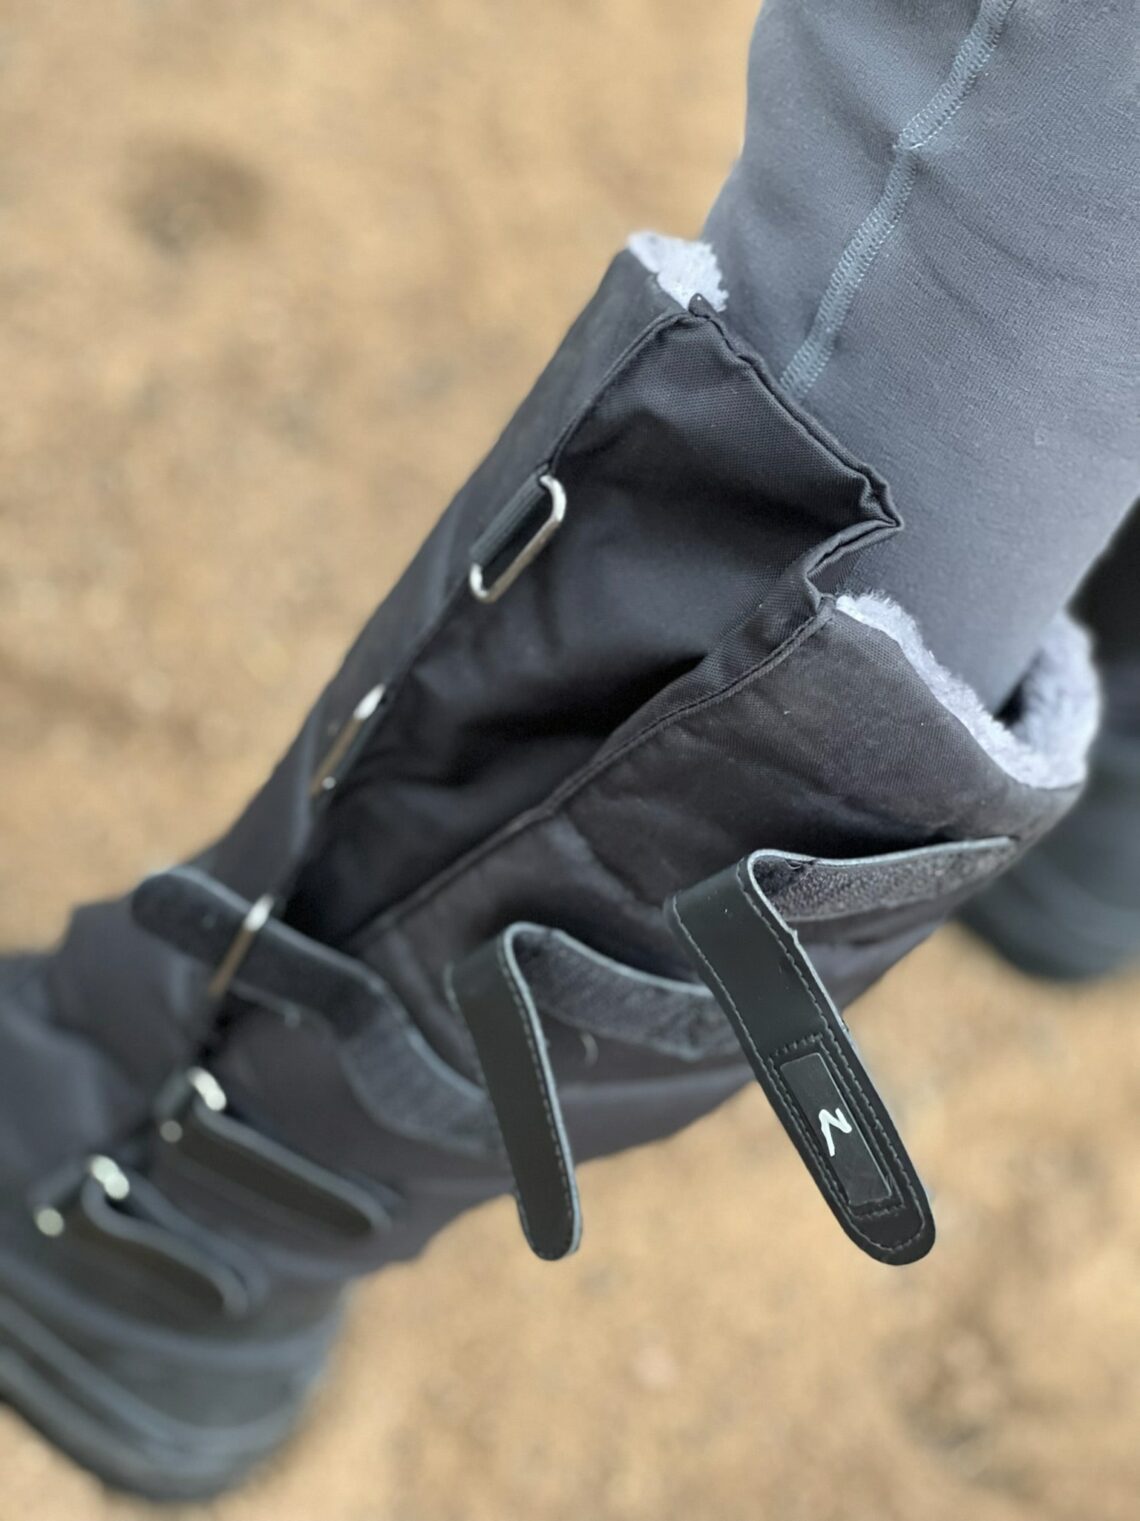 Winter Riding on a Budget (Horze Utah Thermo Boot Review)